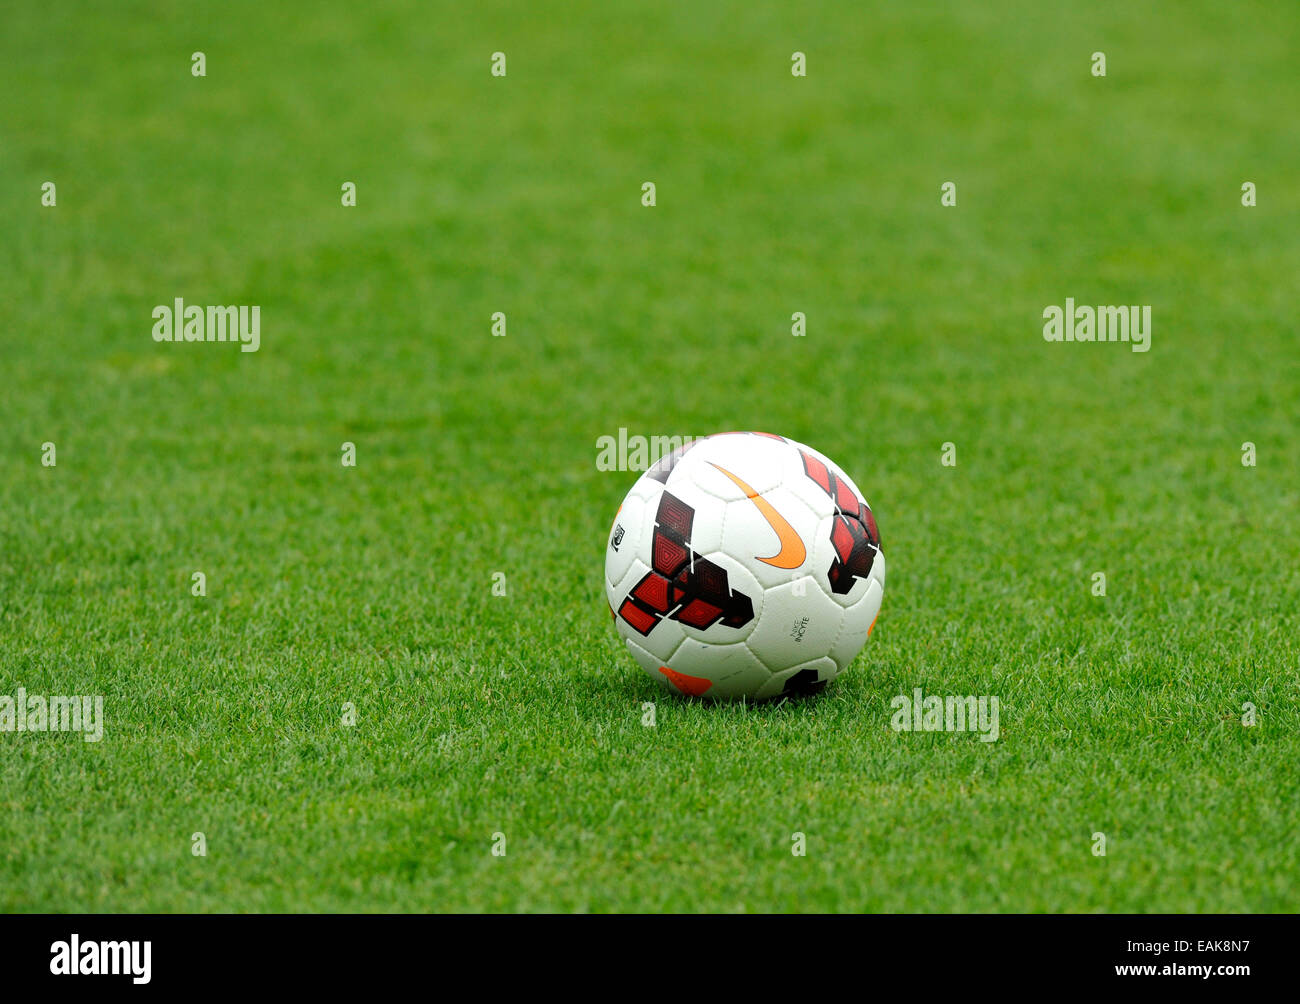 Nike Ball High Resolution Stock Photography and Images - Alamy